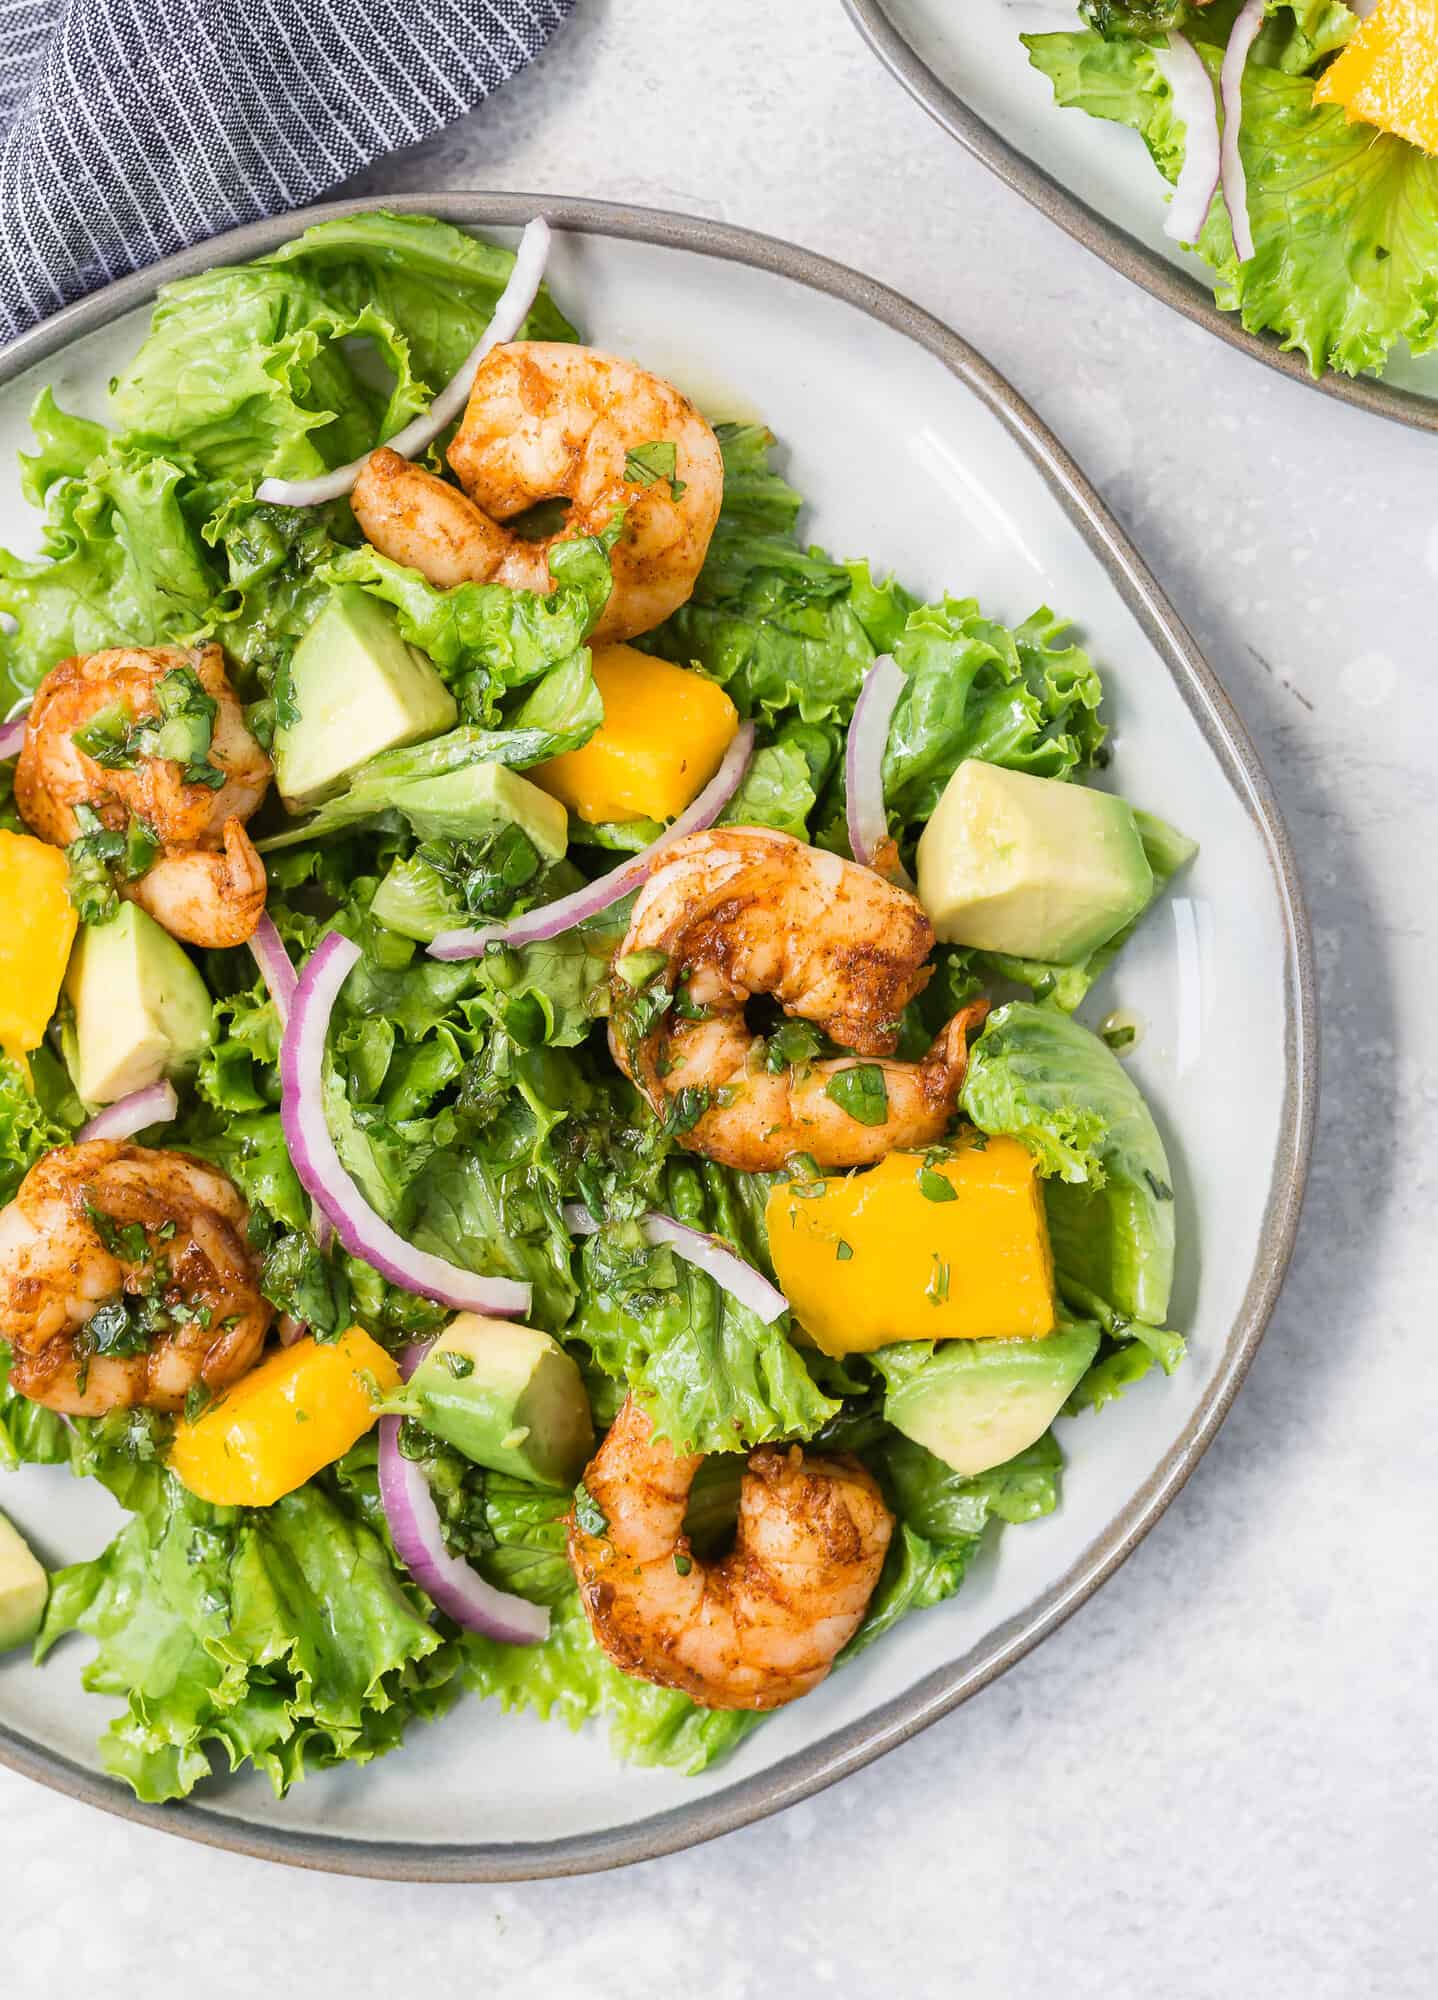 Overhead view of a bright green salad with mango, avocado, red onions, and shrimp.